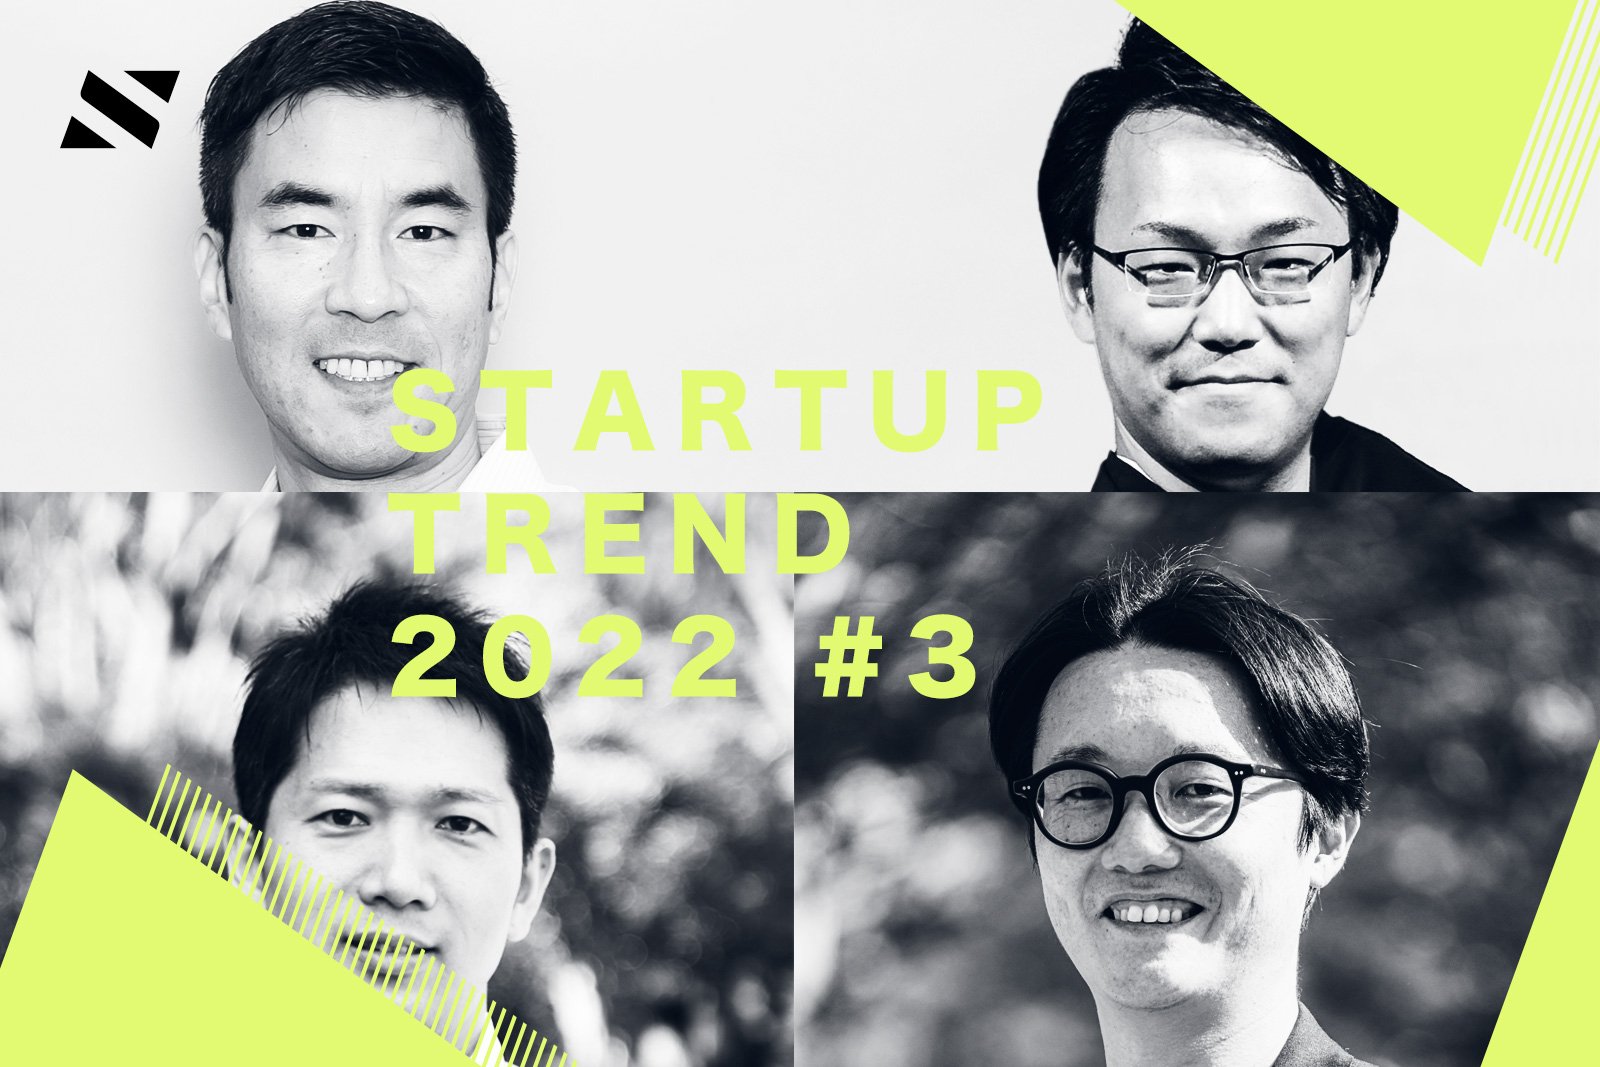 [Startup Trend 2022 #3] "Shopify for X" and "Social Entrepreneurship 3.0" to be excited about after Corona.